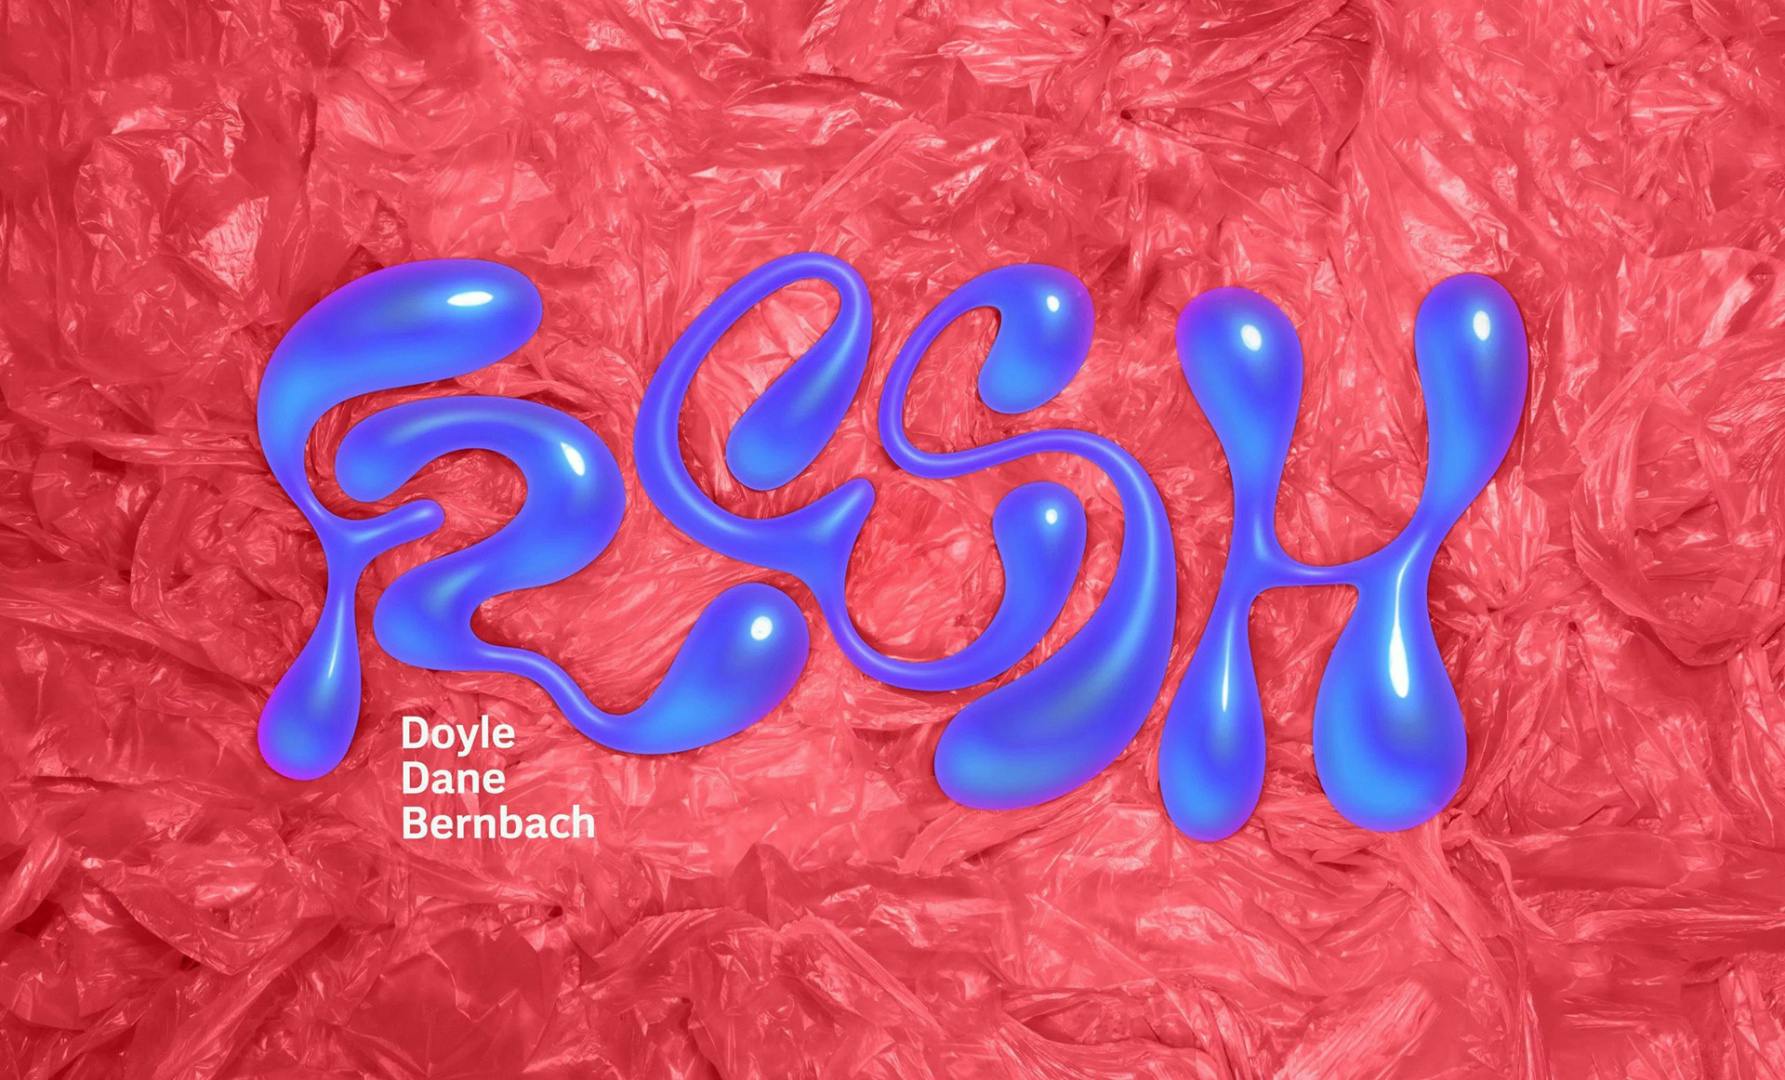 Image shows the word 'Fresh' in a blue wiggly lettering, against a red textured background